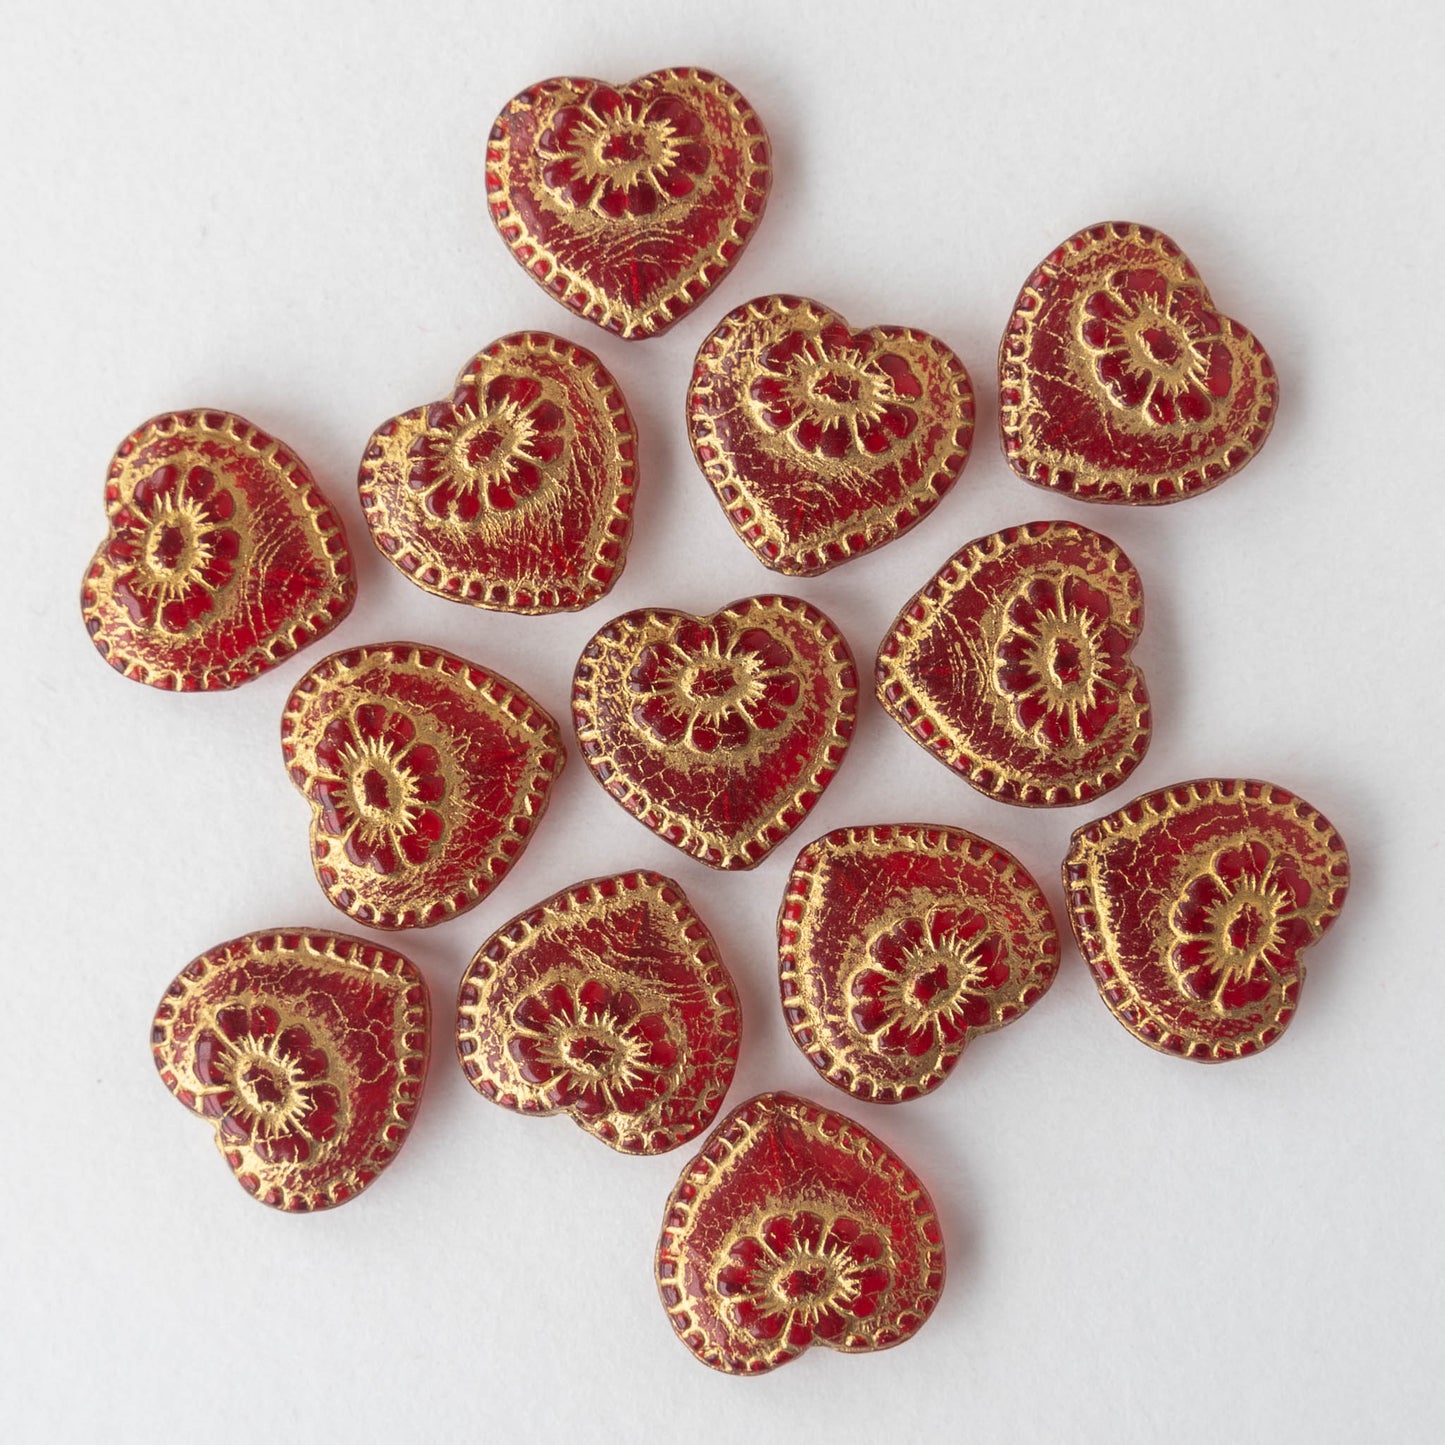 17mm Victorian Glass Heart Beads - Red - 4 or 12